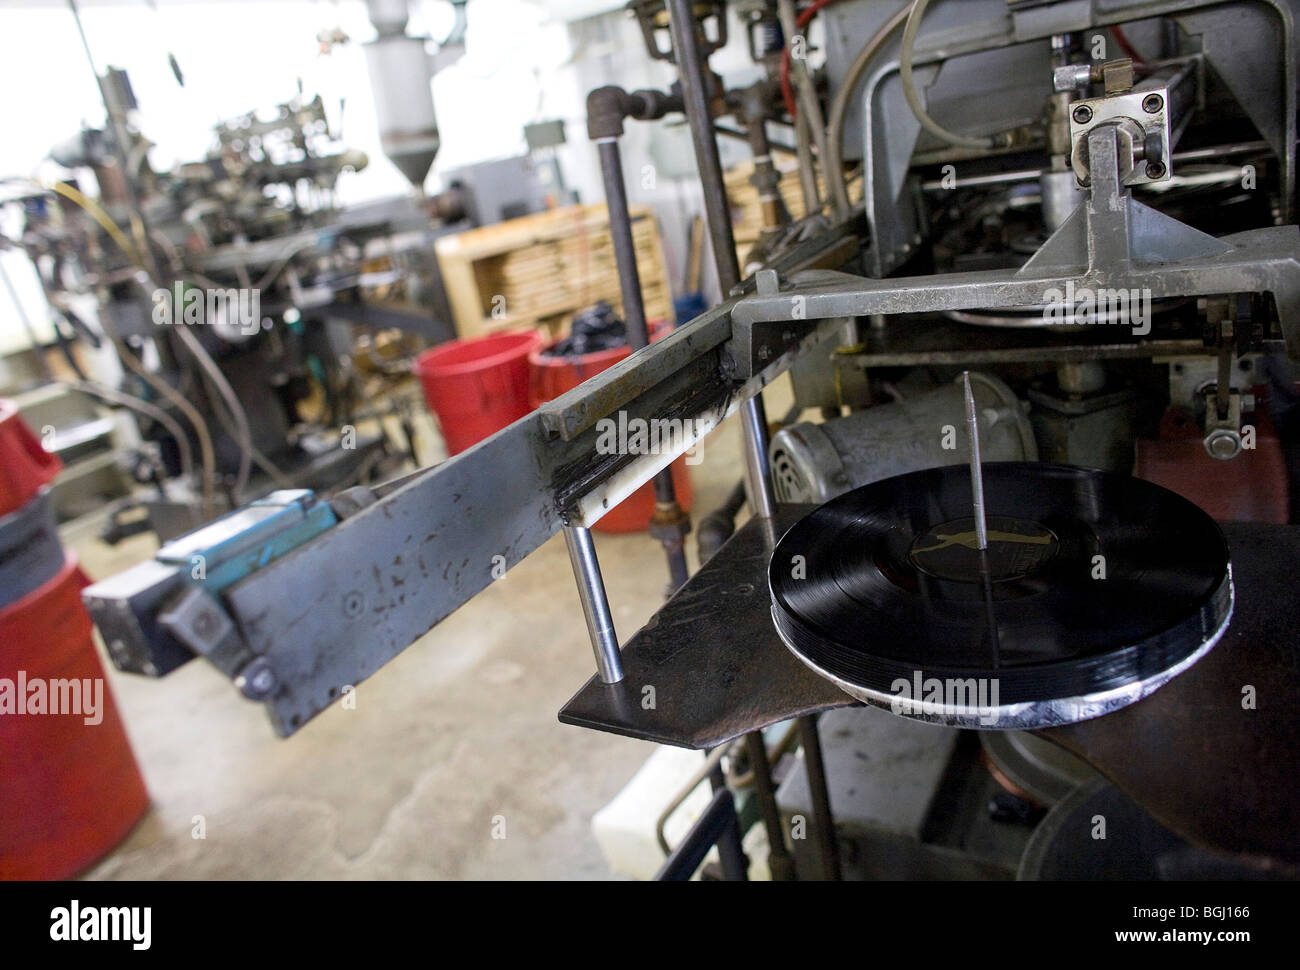 The United Record Pressing plant. A Michael Jackson record being pressed. Stock Photo